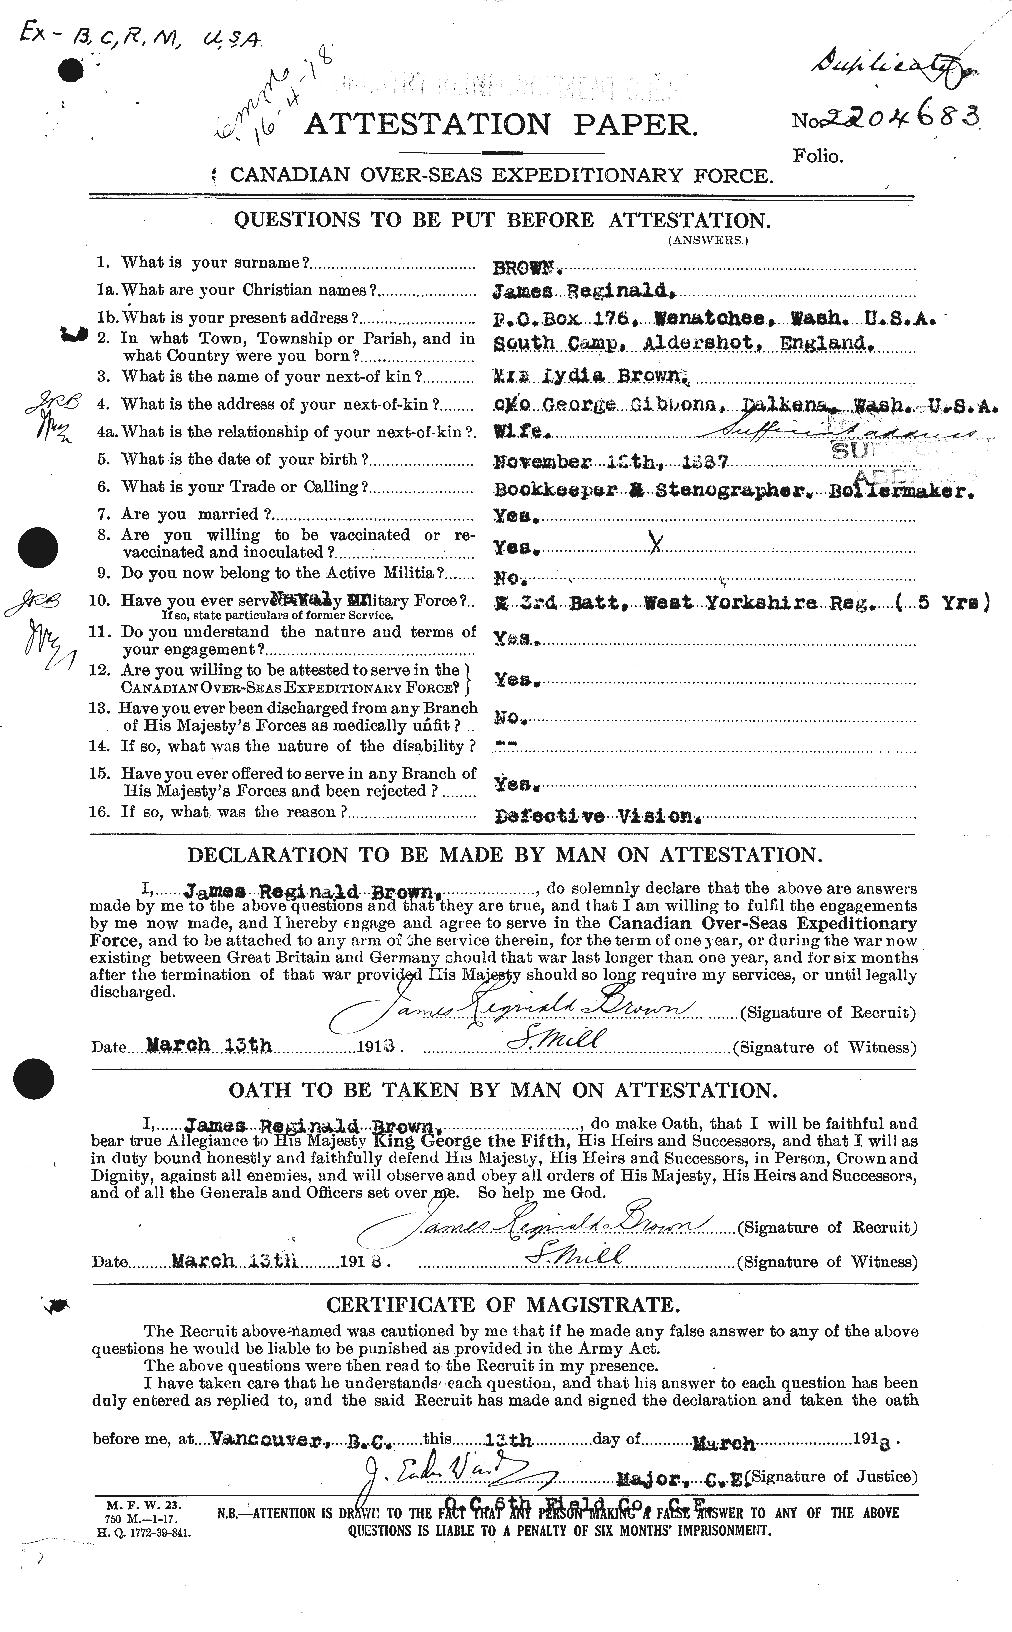 Personnel Records of the First World War - CEF 269577a